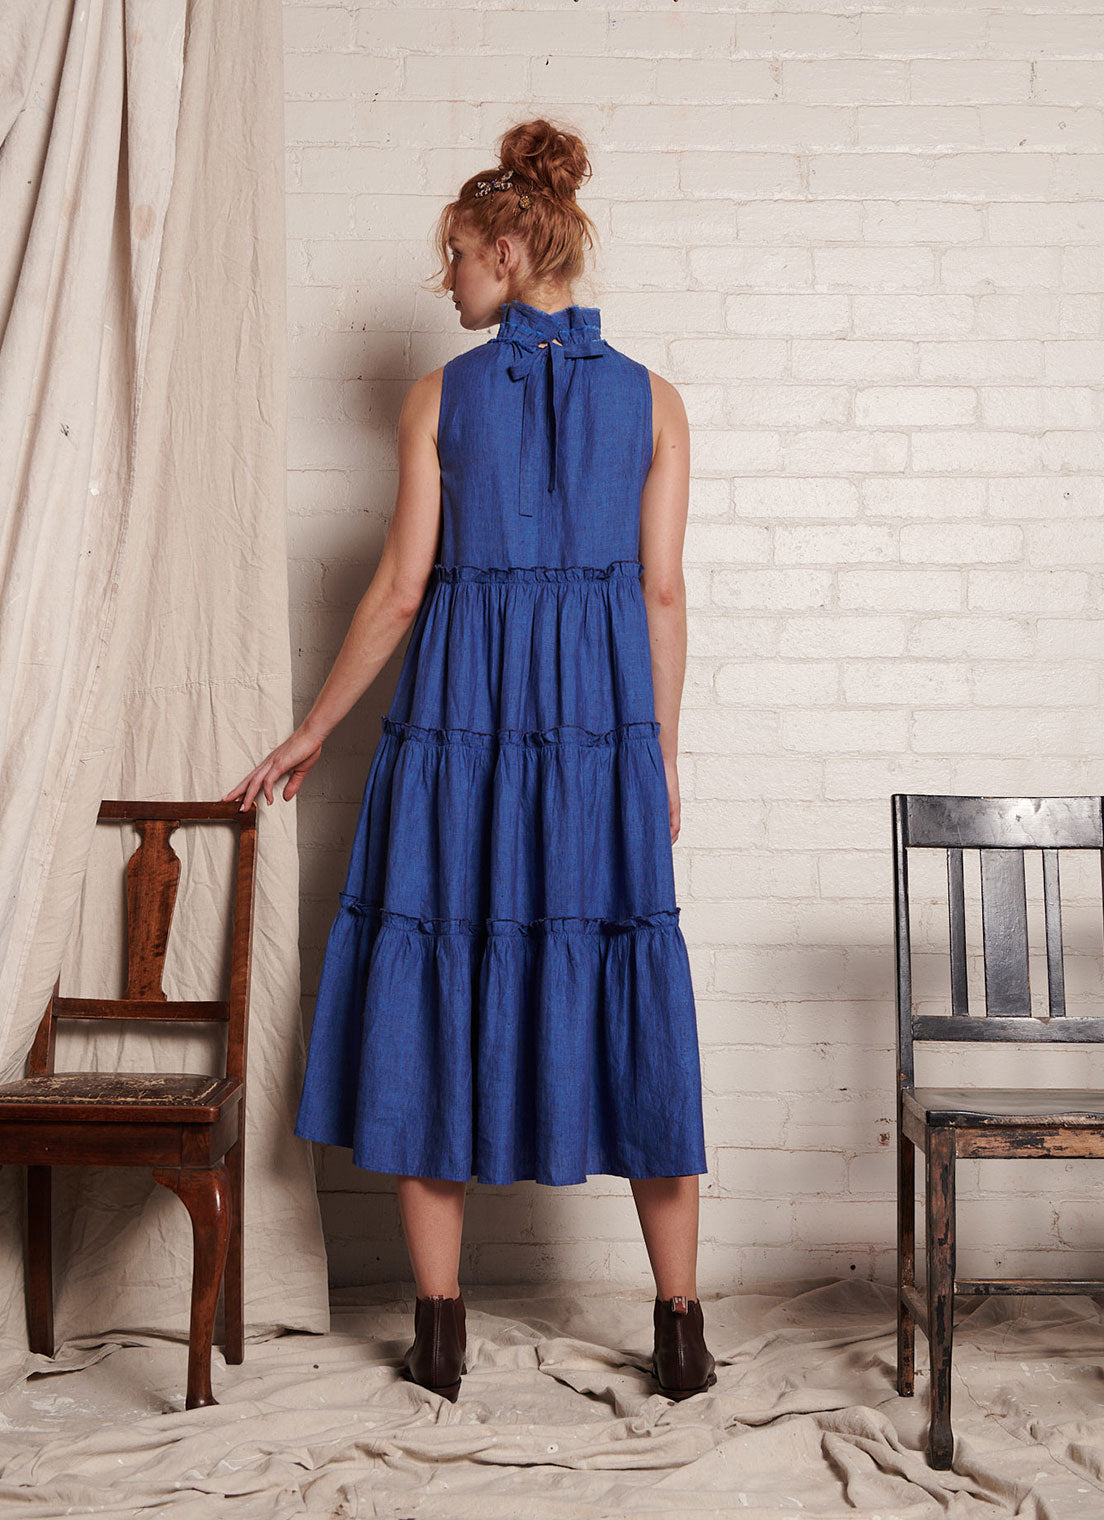 A blue, sleeveless, pure European linen, tiered dress with ruffled collar and detailing